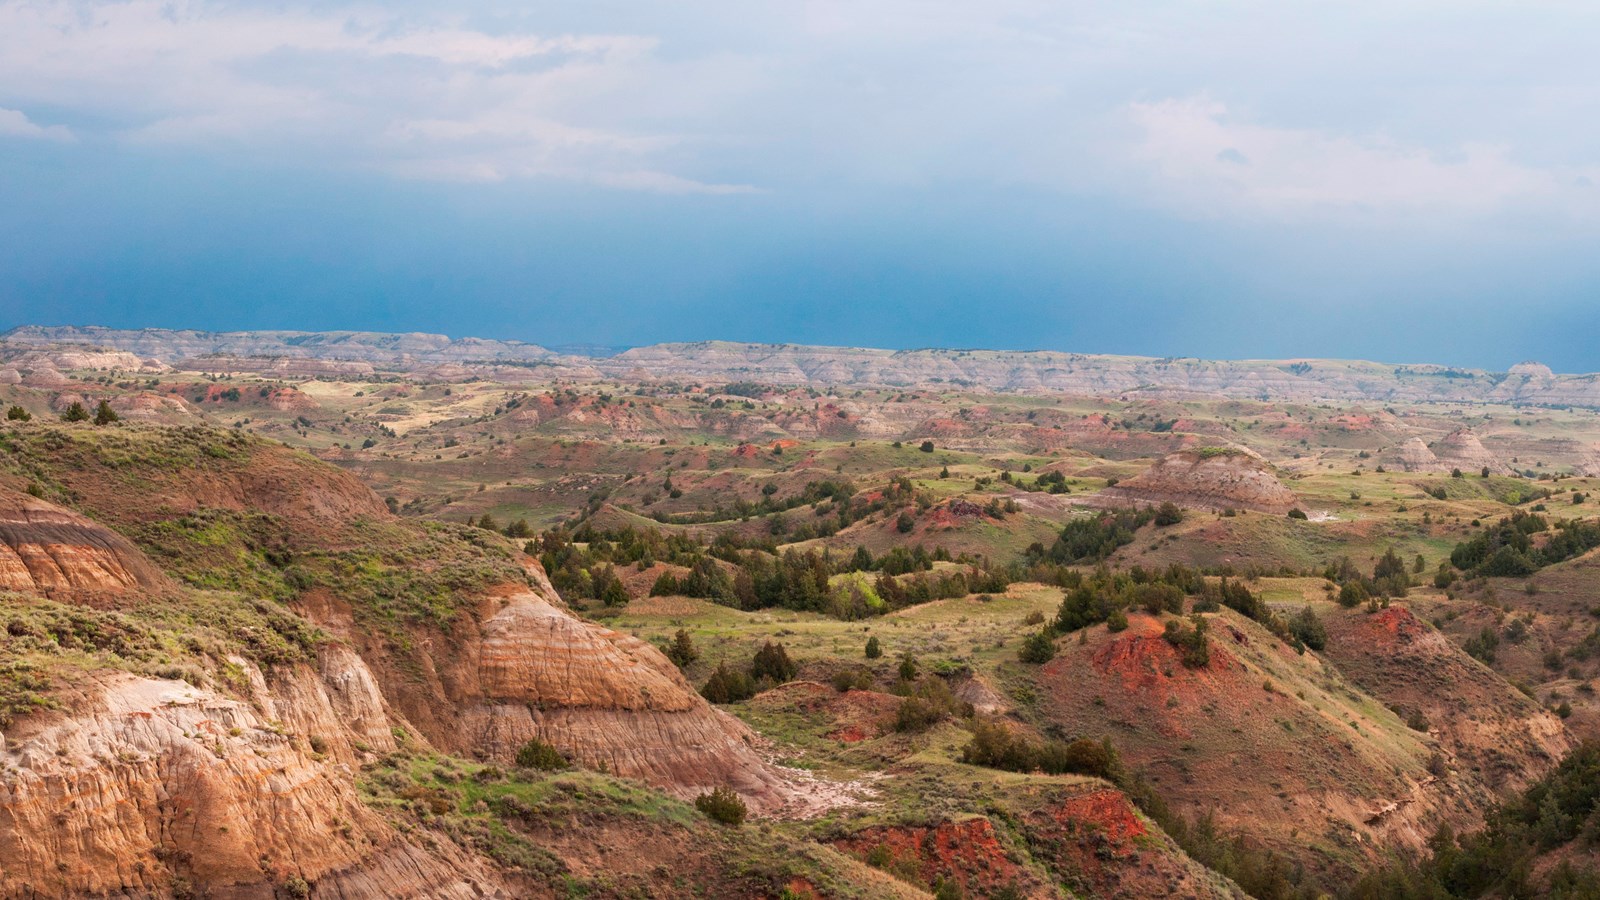 A view of colorful buttes under an overcast sky, with sunlight just breaking through